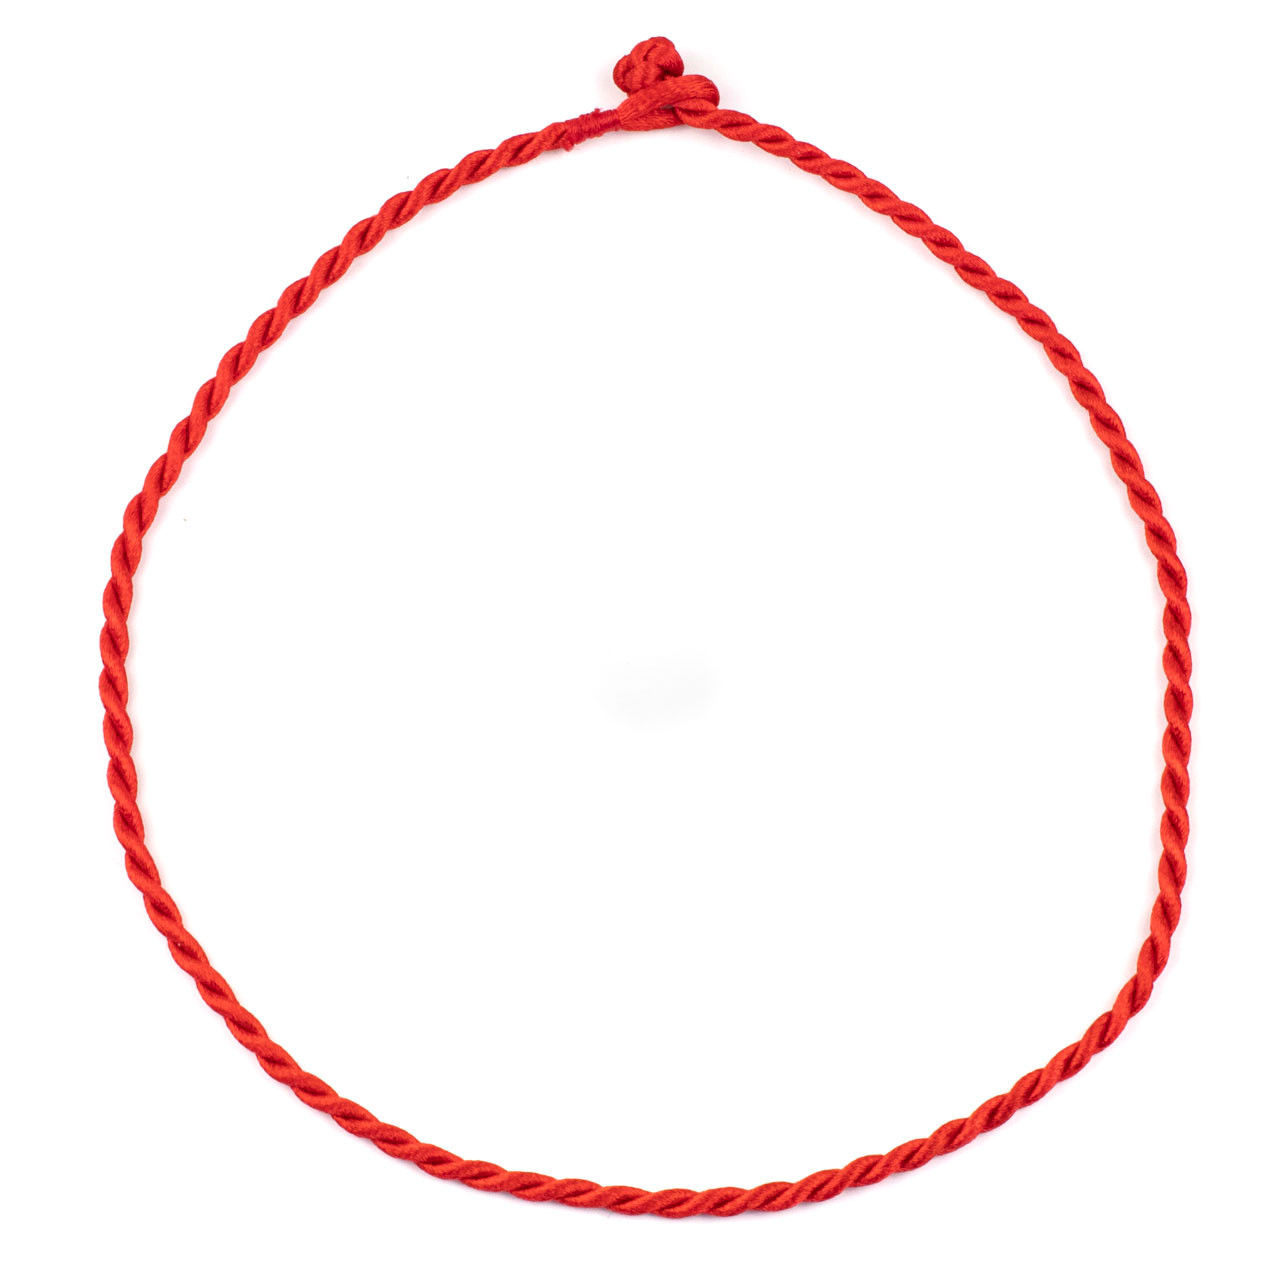 Braided Satin Nylon Cord Necklace - Red 5mm Cord 18 with Knot Closure